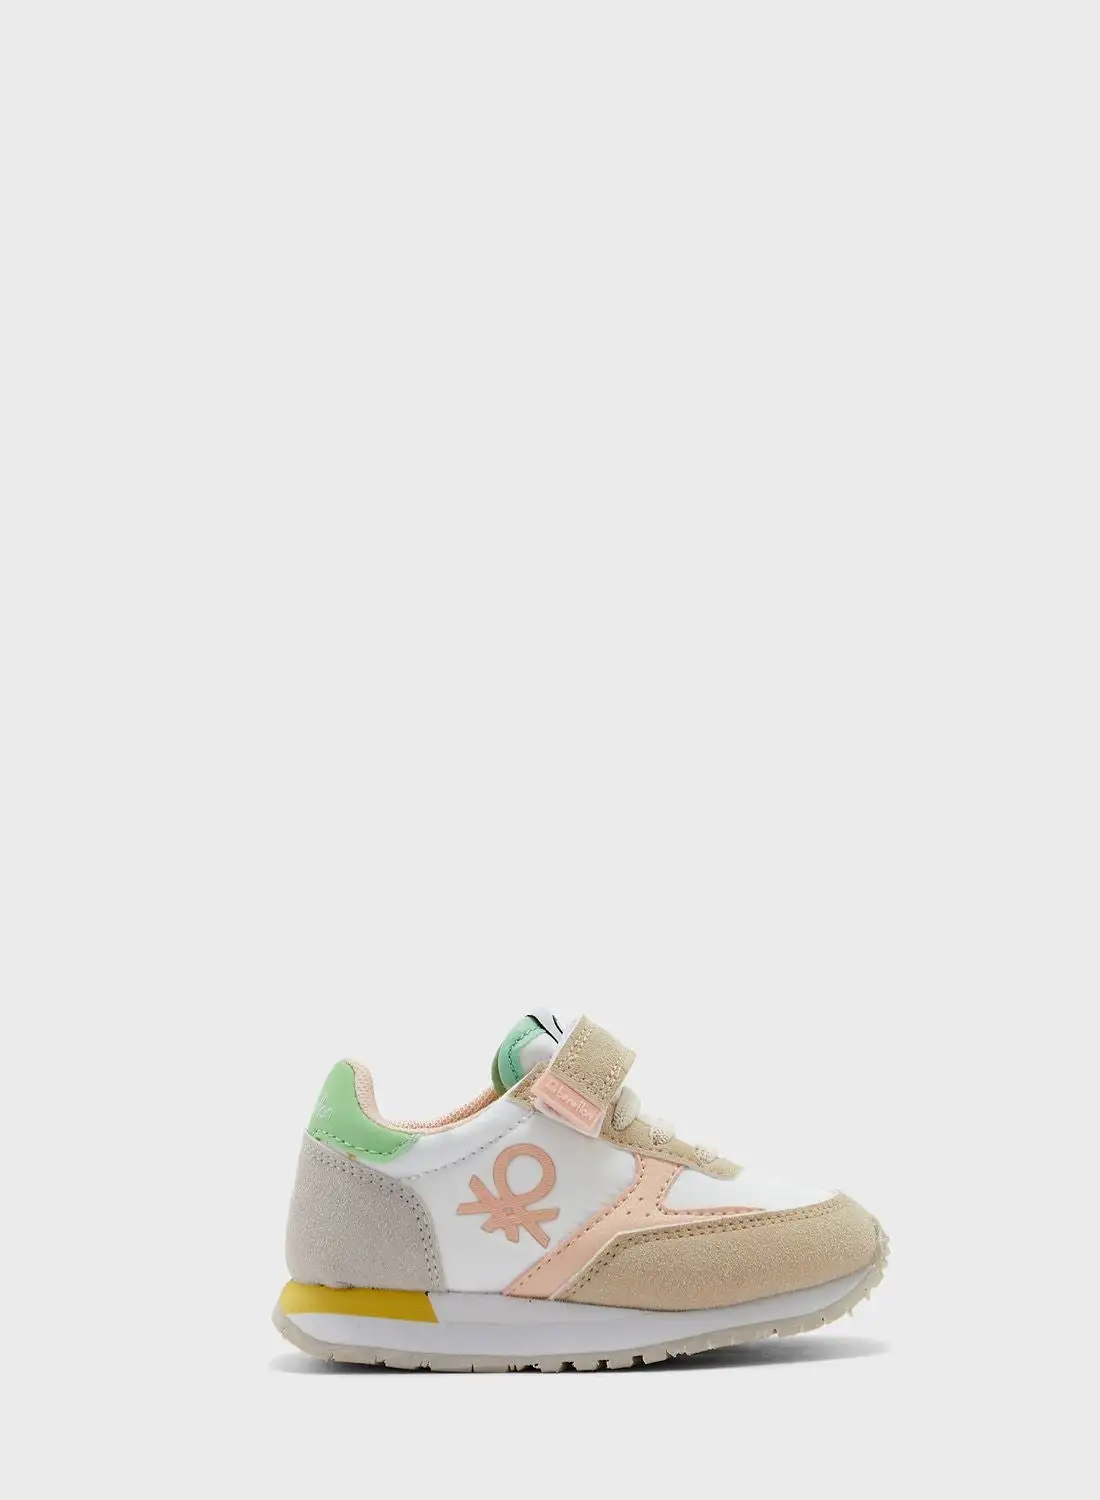 Benetton Kids Lace Up Sneakers